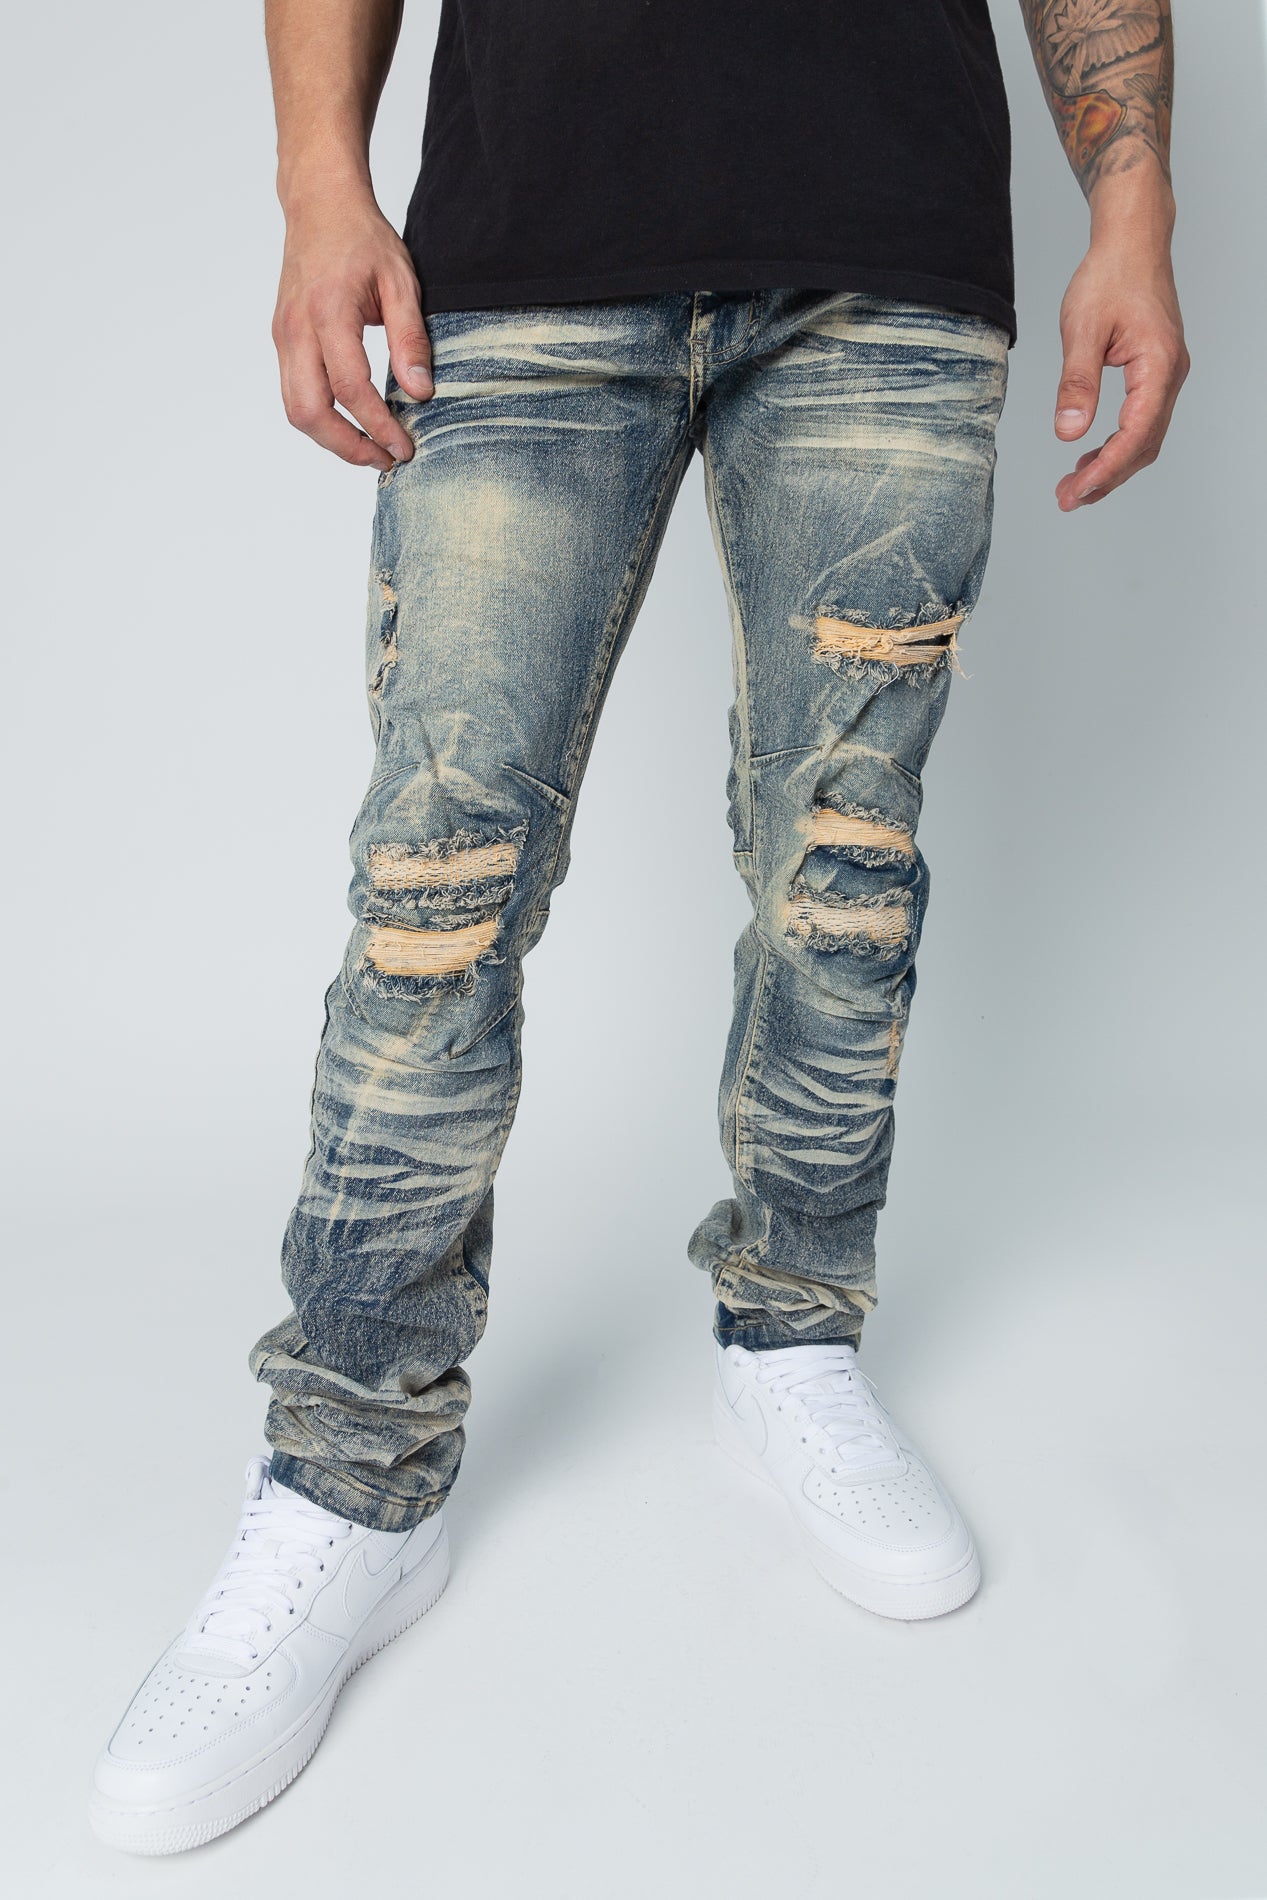 Light tint Washed up slim fit denim jeans, rip and repair style.